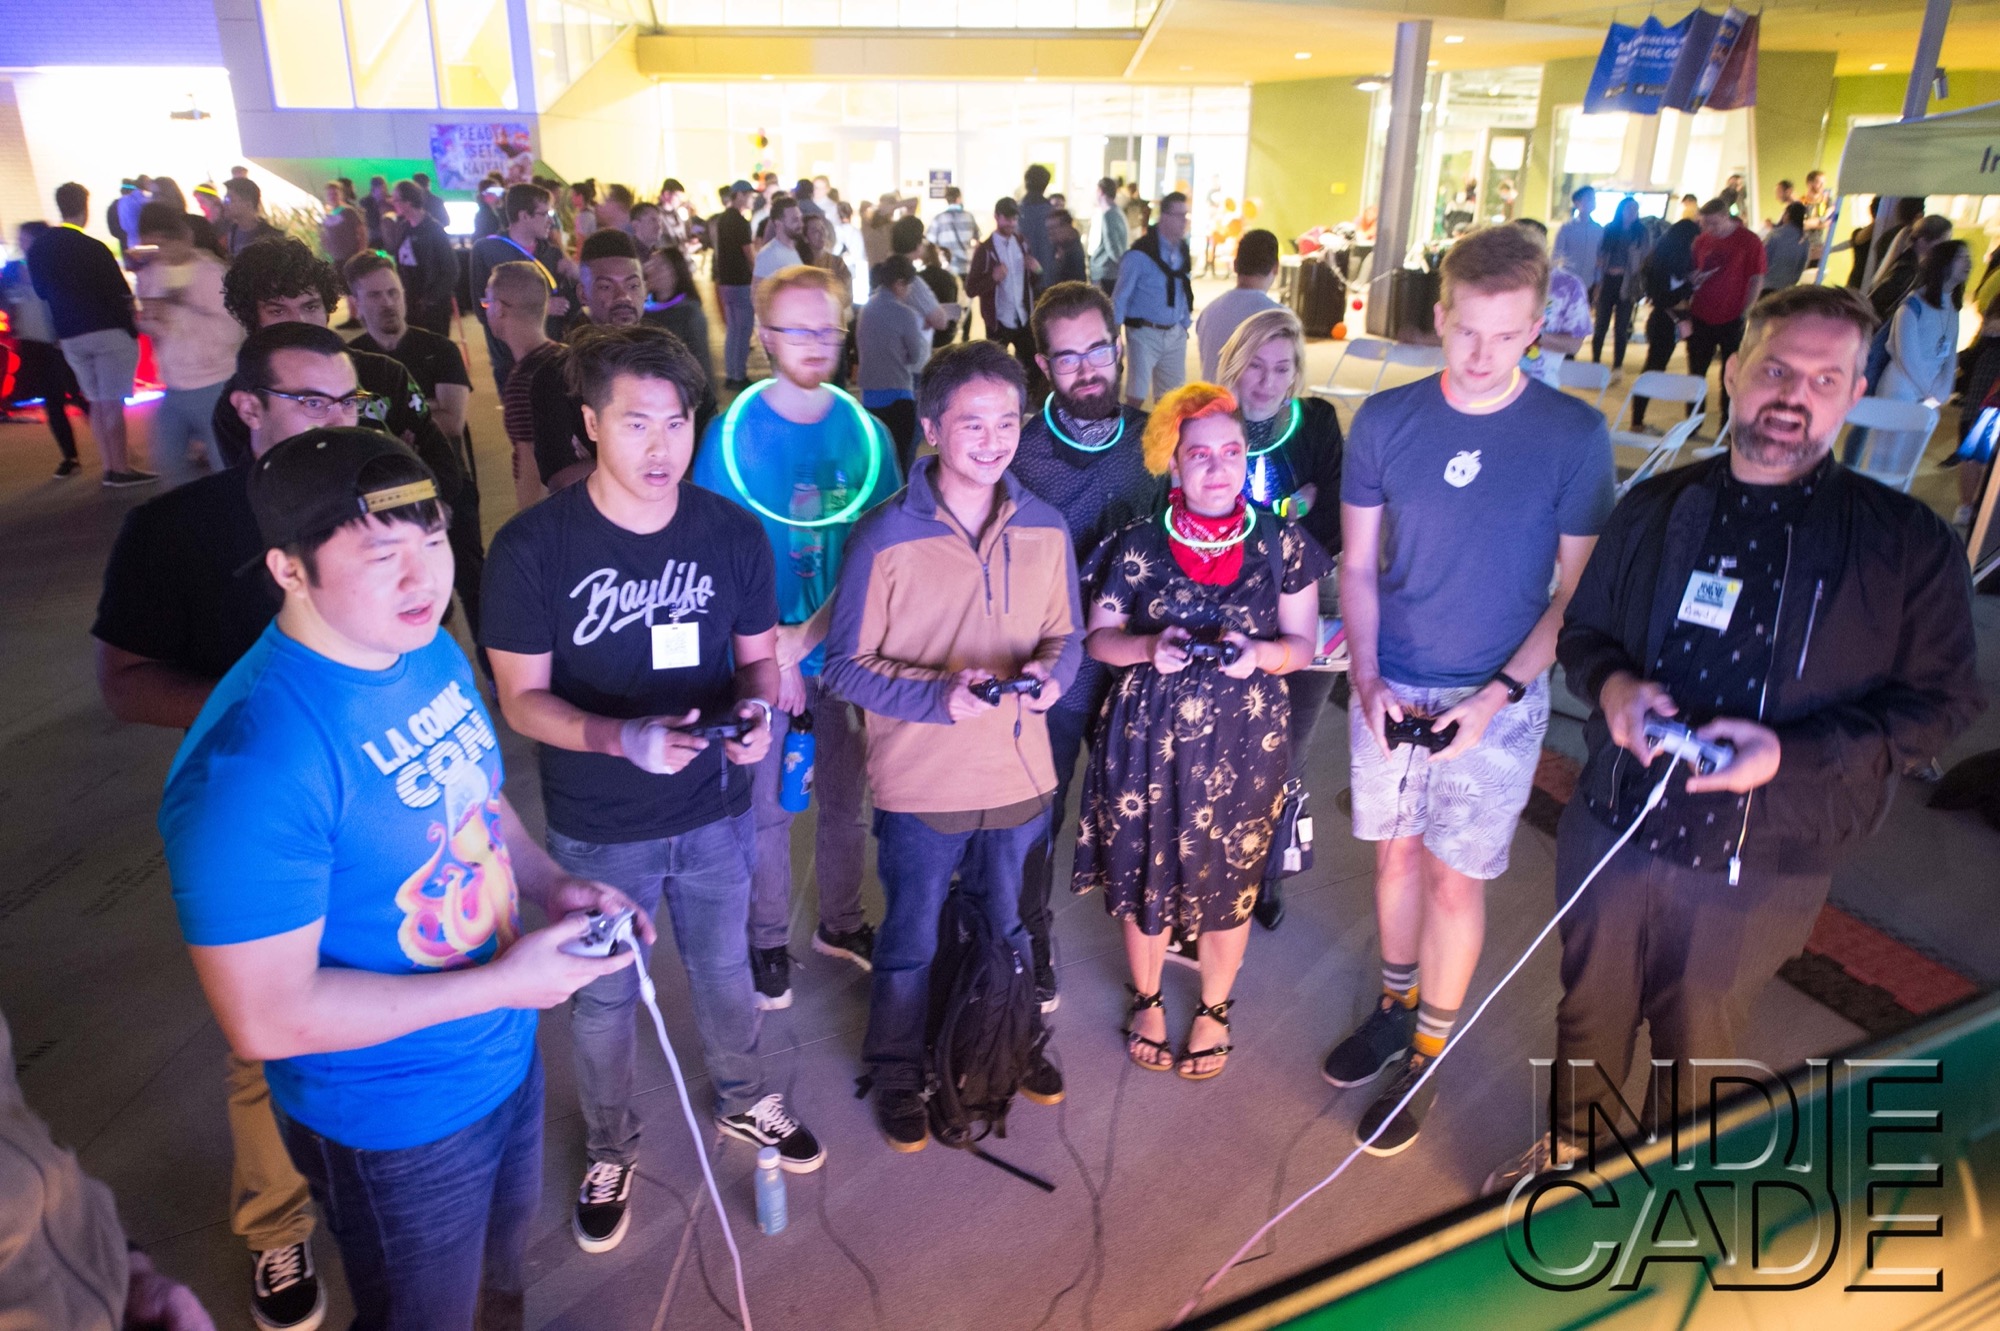 a dozen people stand in a semicircle looking at a large screen off camera. six of them hold video game controllers and a large crowd is behind them. it's at night outdoors